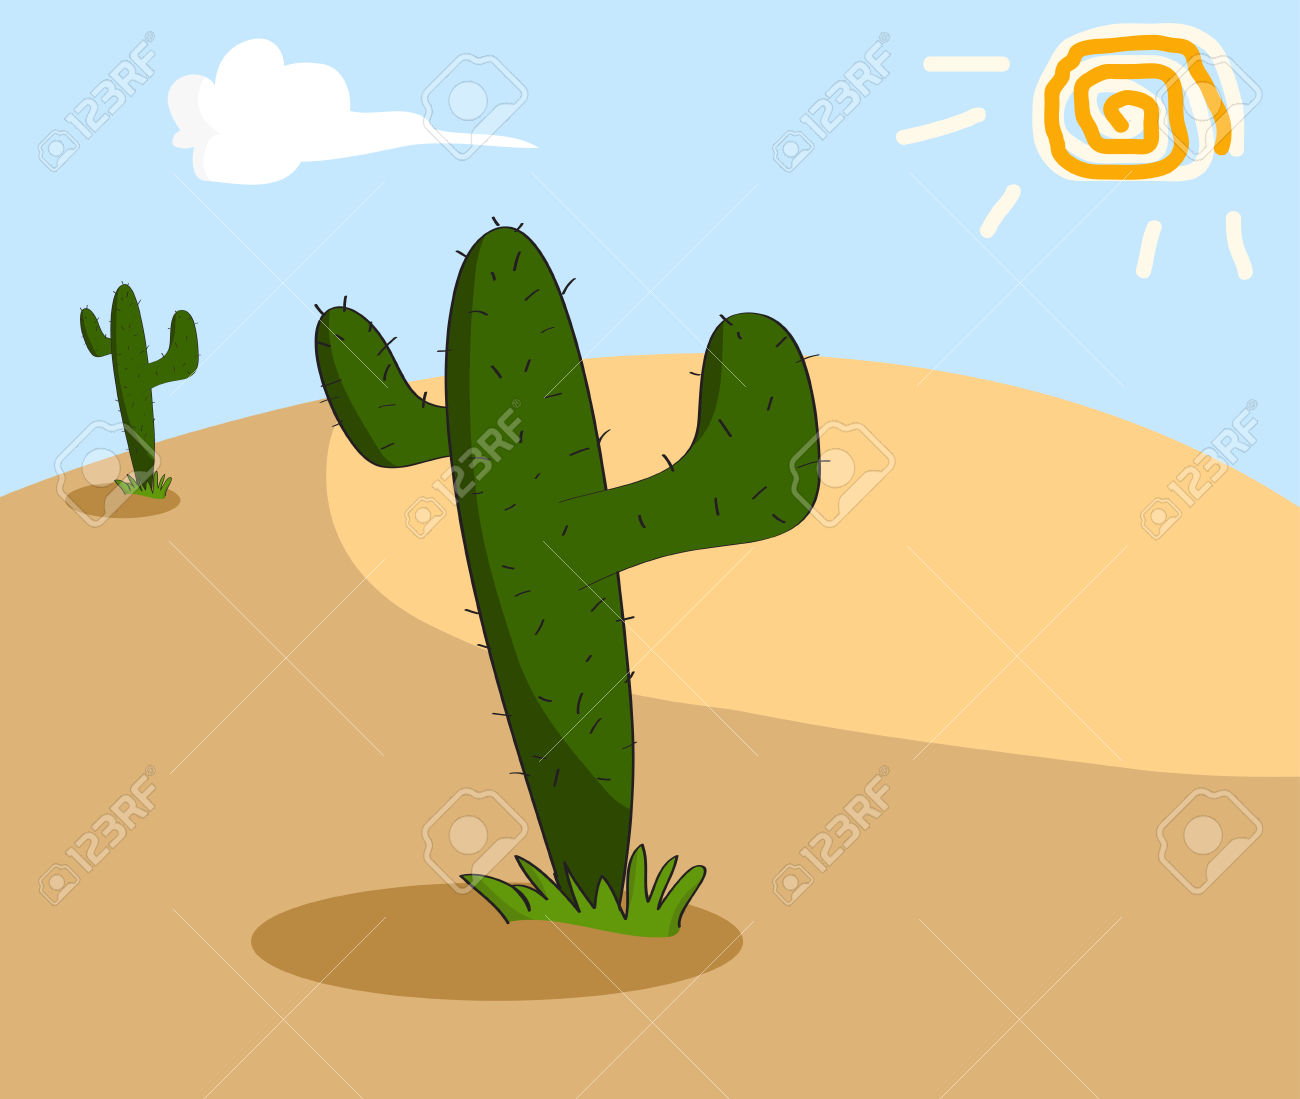 Cactus Grows In The Arid Desert Royalty Free Cliparts, Vectors.